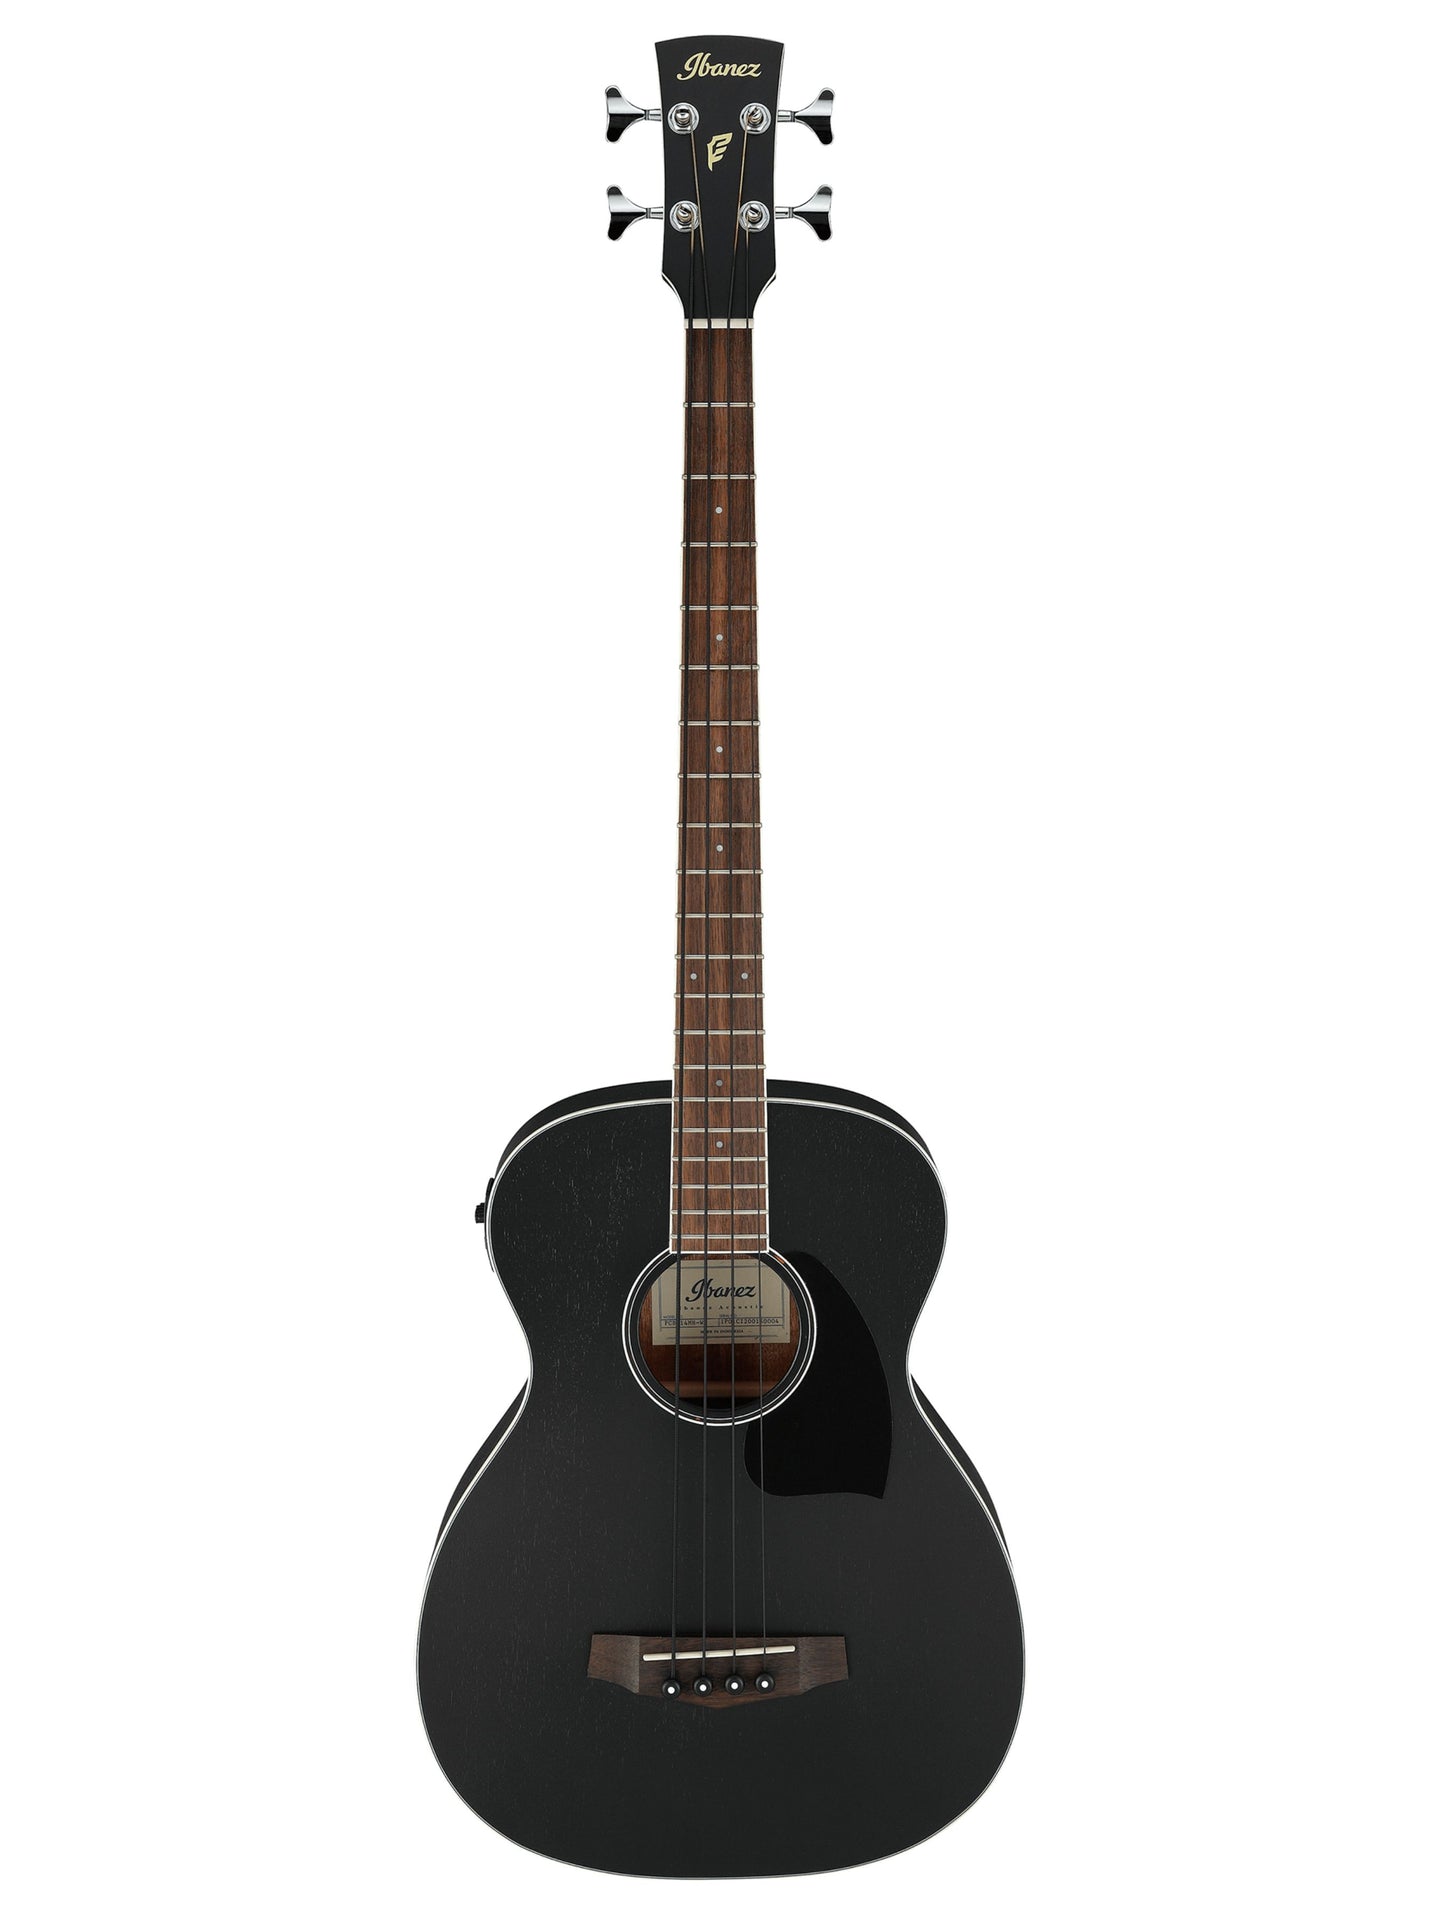 Ibanez PCBE14 Acoustic Bass, Weathered Black Open Pore